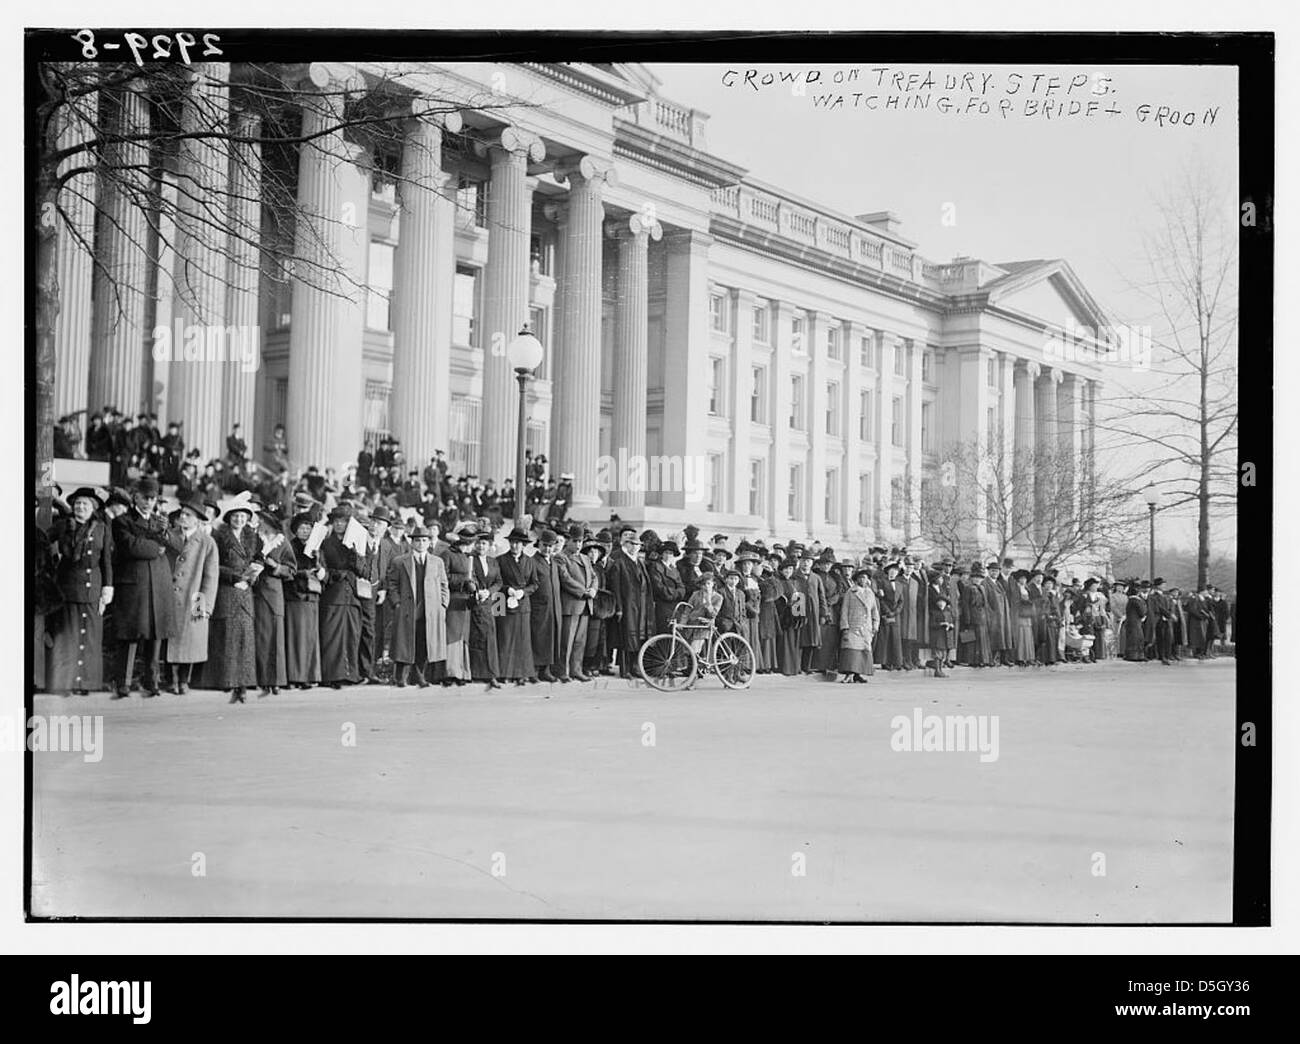 Crowd on Treasury steps watching for Bride and Groom (Wilson) (LOC) Stock Photo